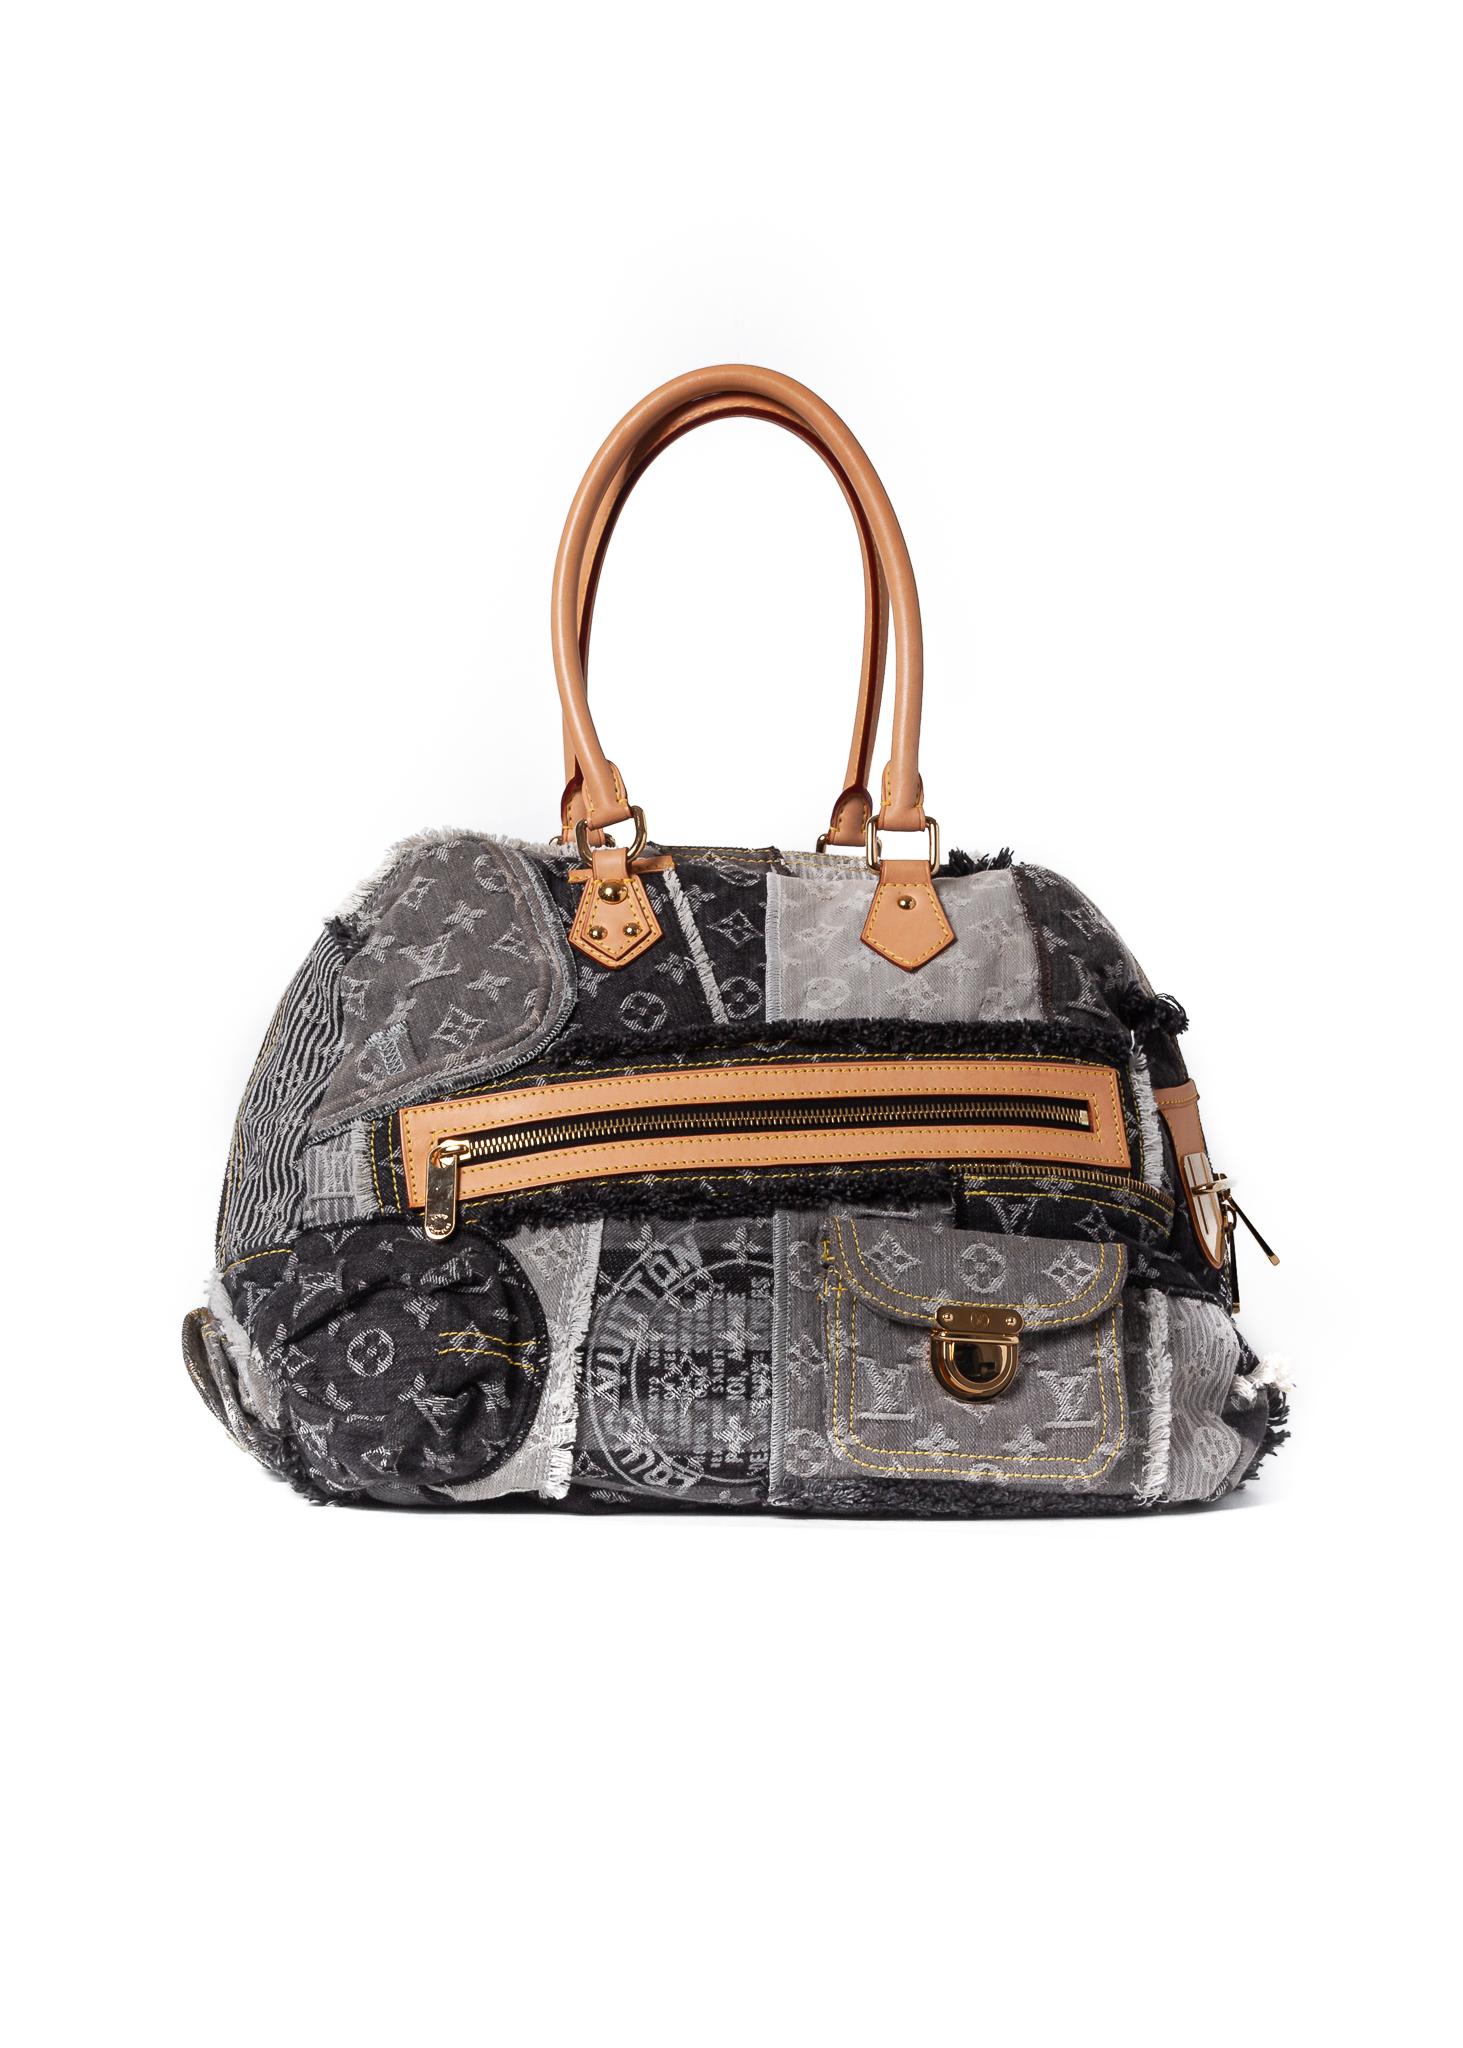 This Bowly Bag is made of blue monogram denim with patchwork design. The bag features dual top handles, a leather tag, leather finishes, brass hardware and a front and back push lock closure pockets. Top zip closure opens to a floral printed fabric